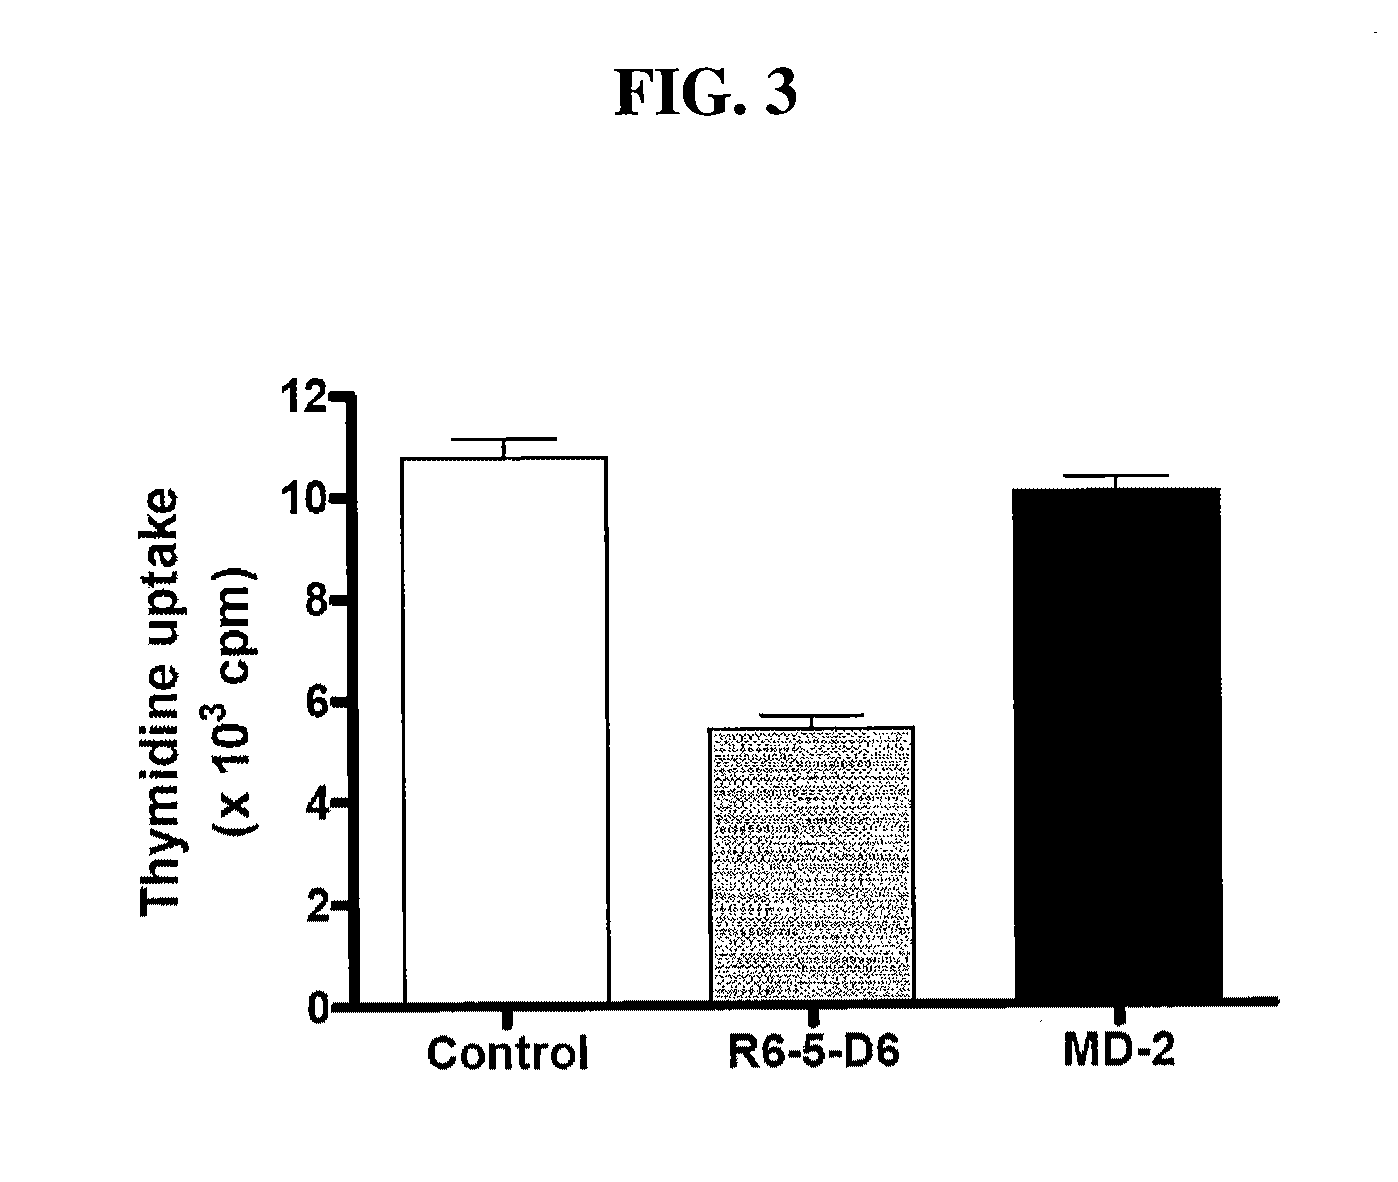 Antibody modulating the differentiation and function of dendritic cells via binding intercellular adhesion molecule-1 and use thereof